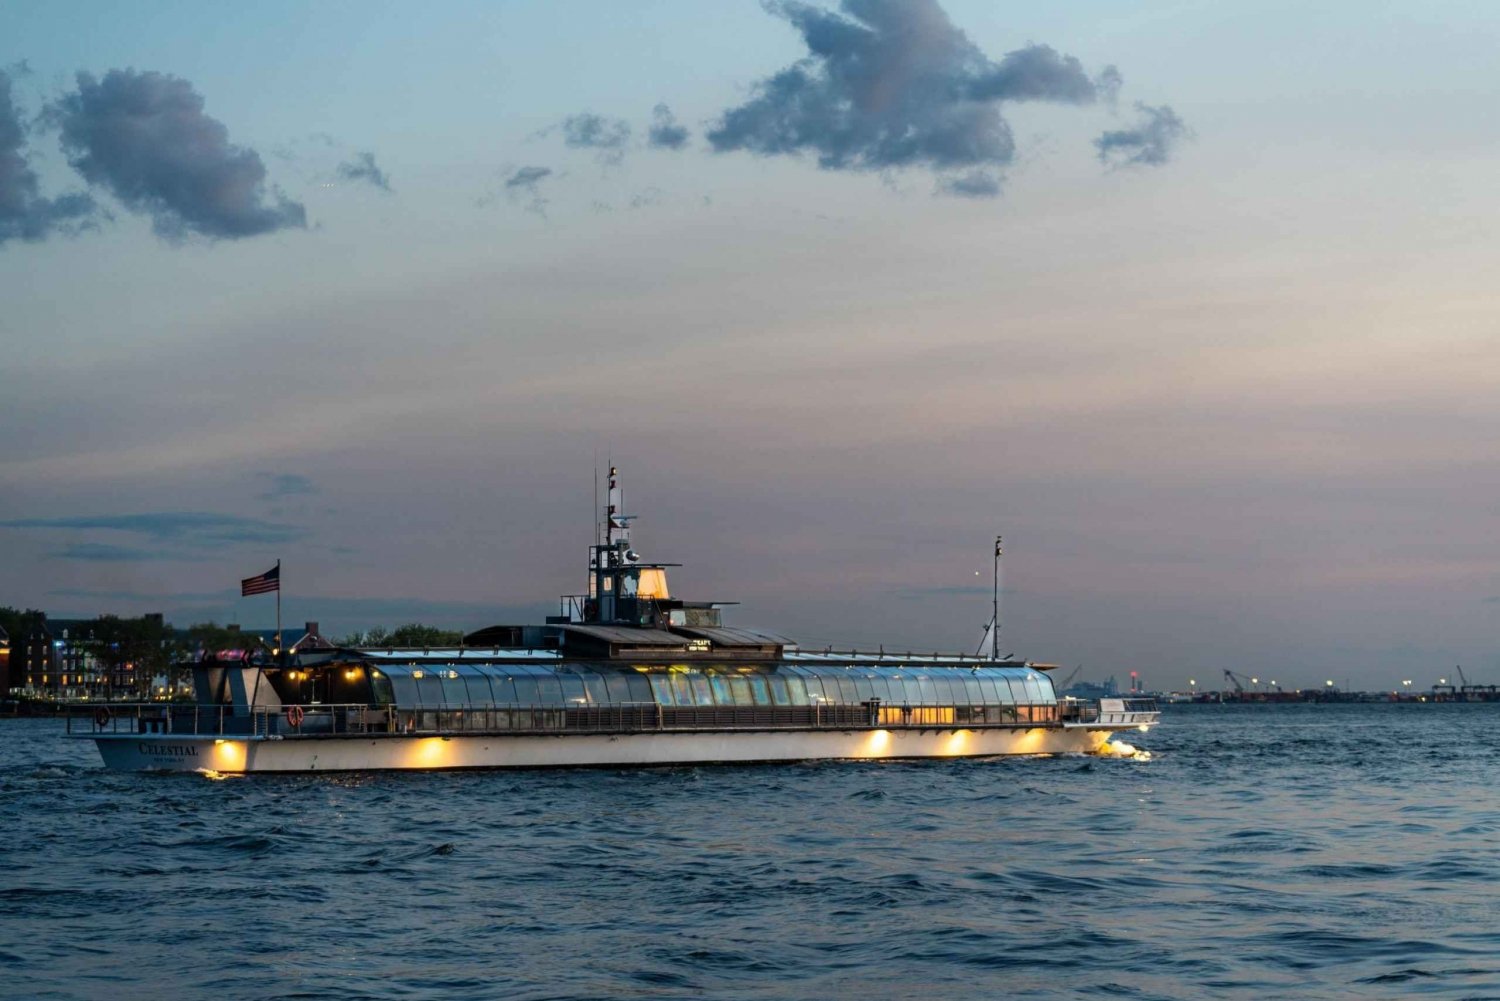 NYC: New Year's Eve Harbor Cruise with Gourmet Lunch